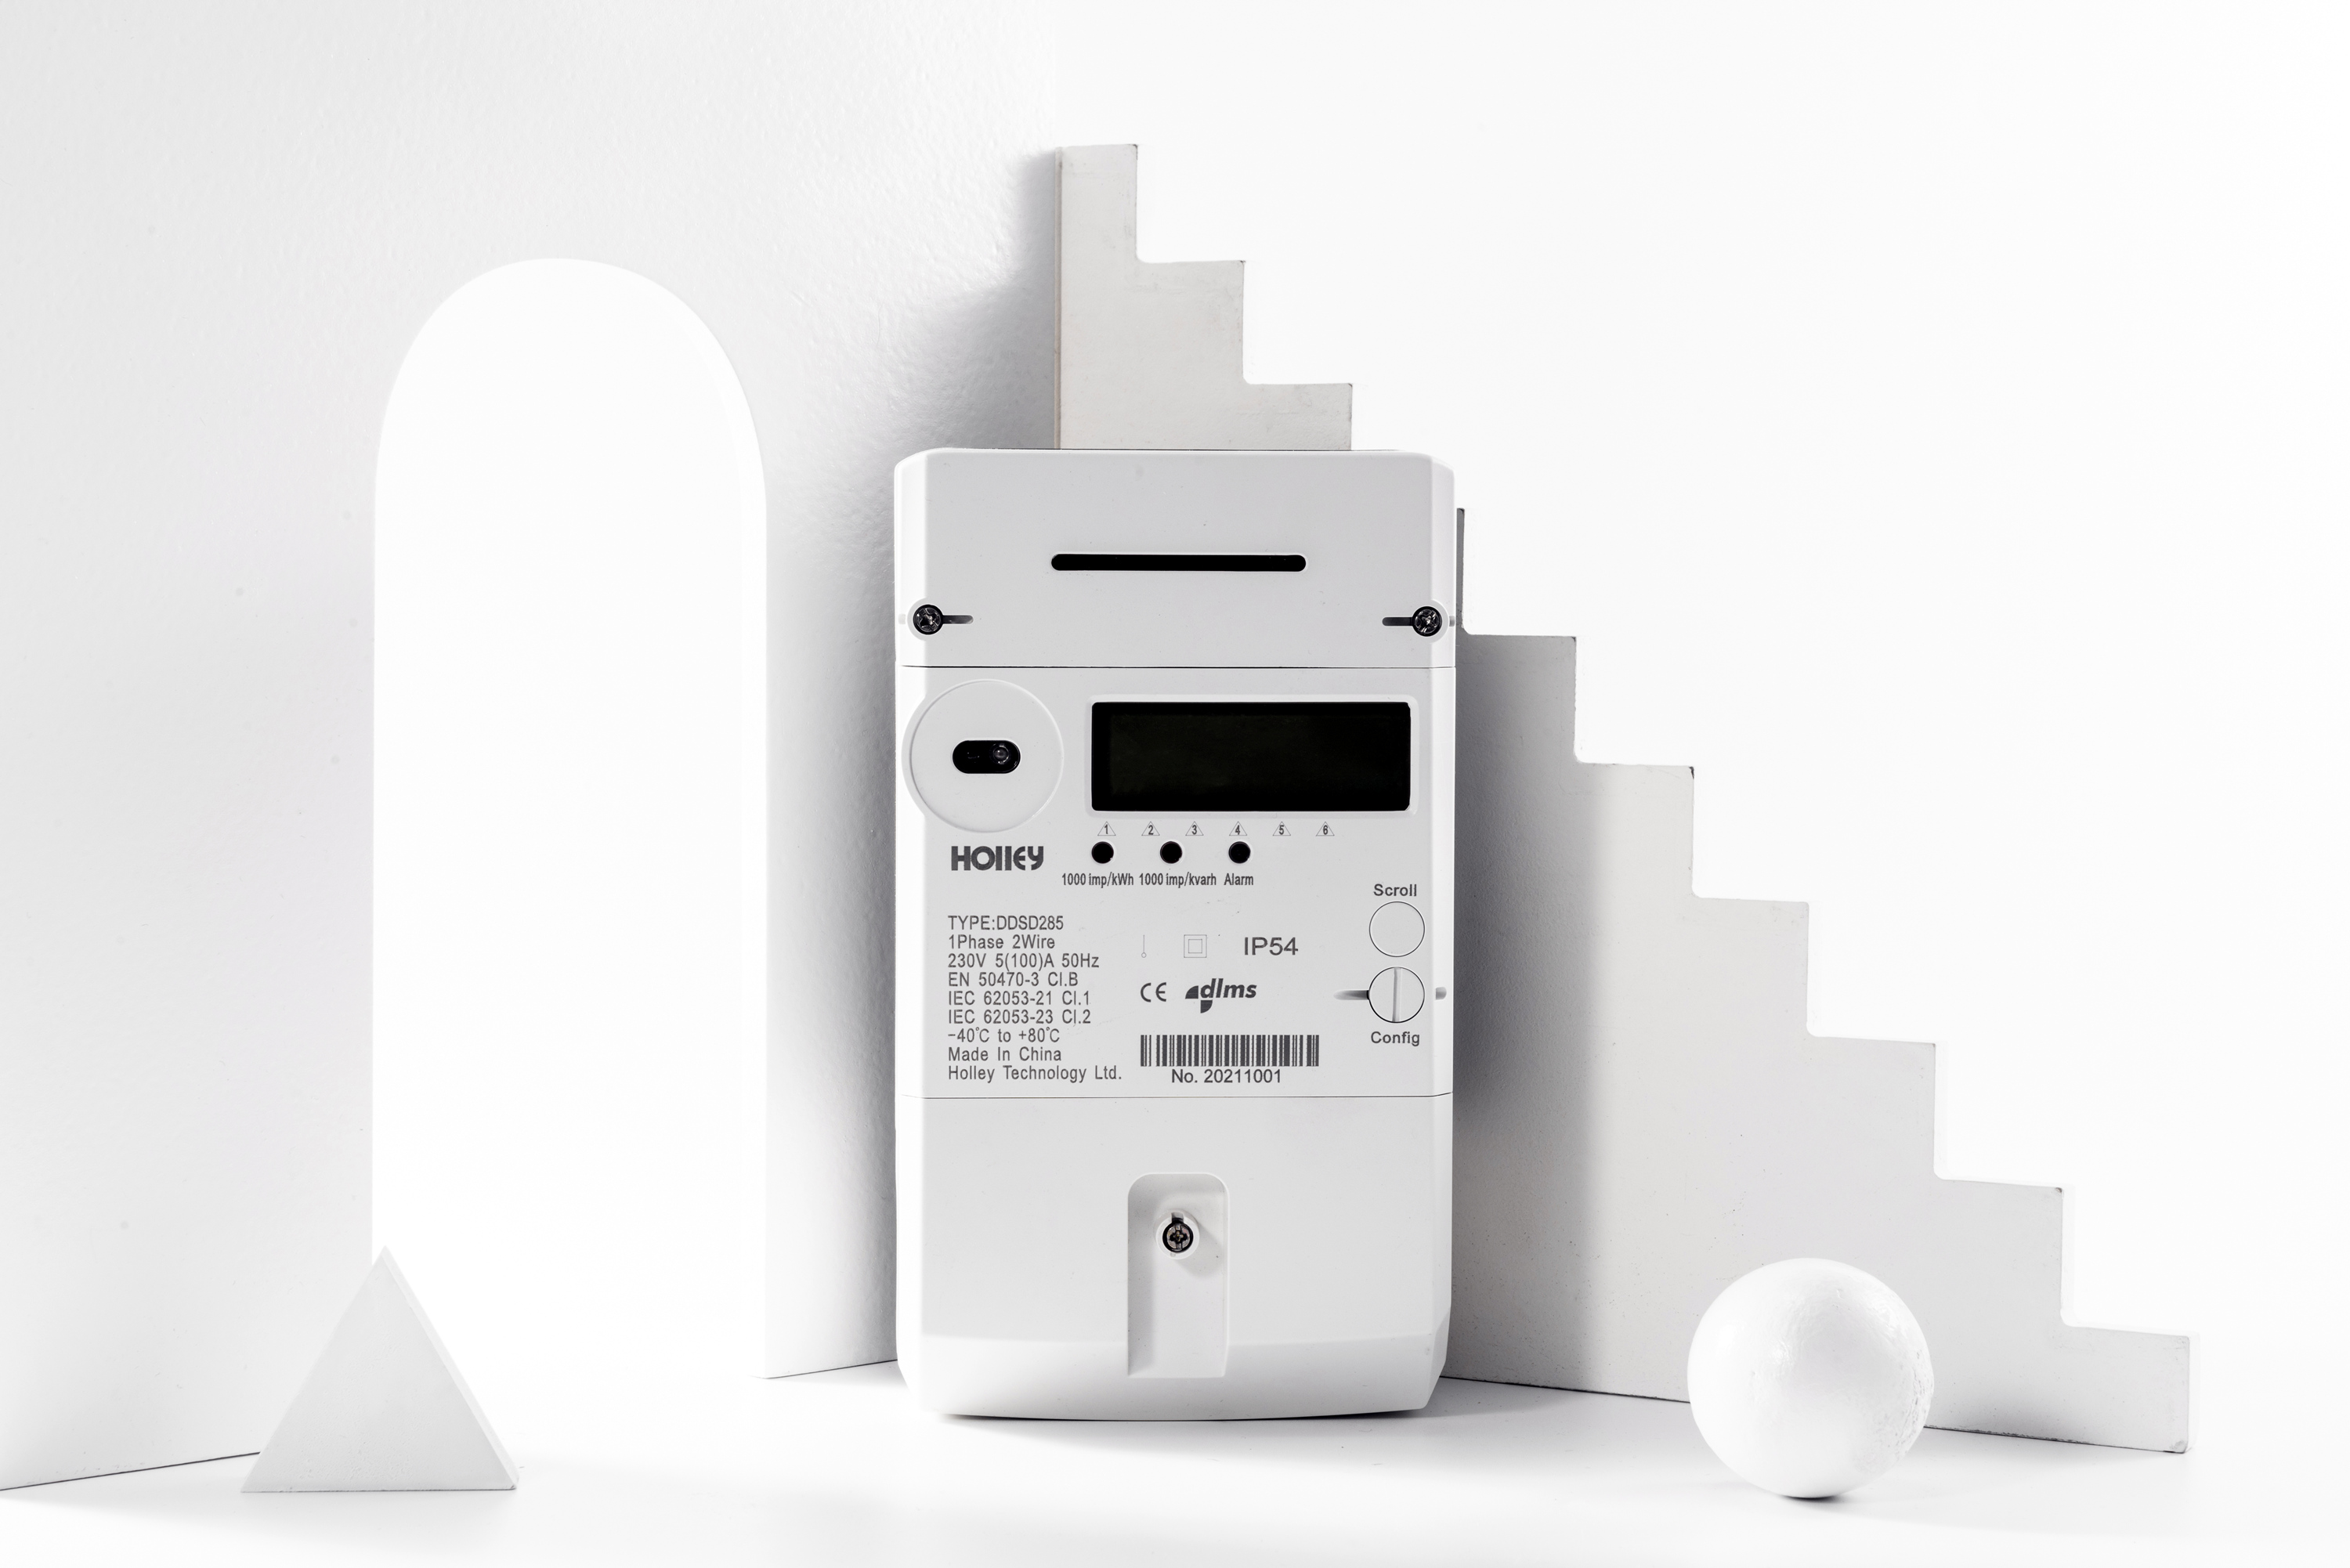 Holley Electric Energy Meter Improves Flexibility and Versatility